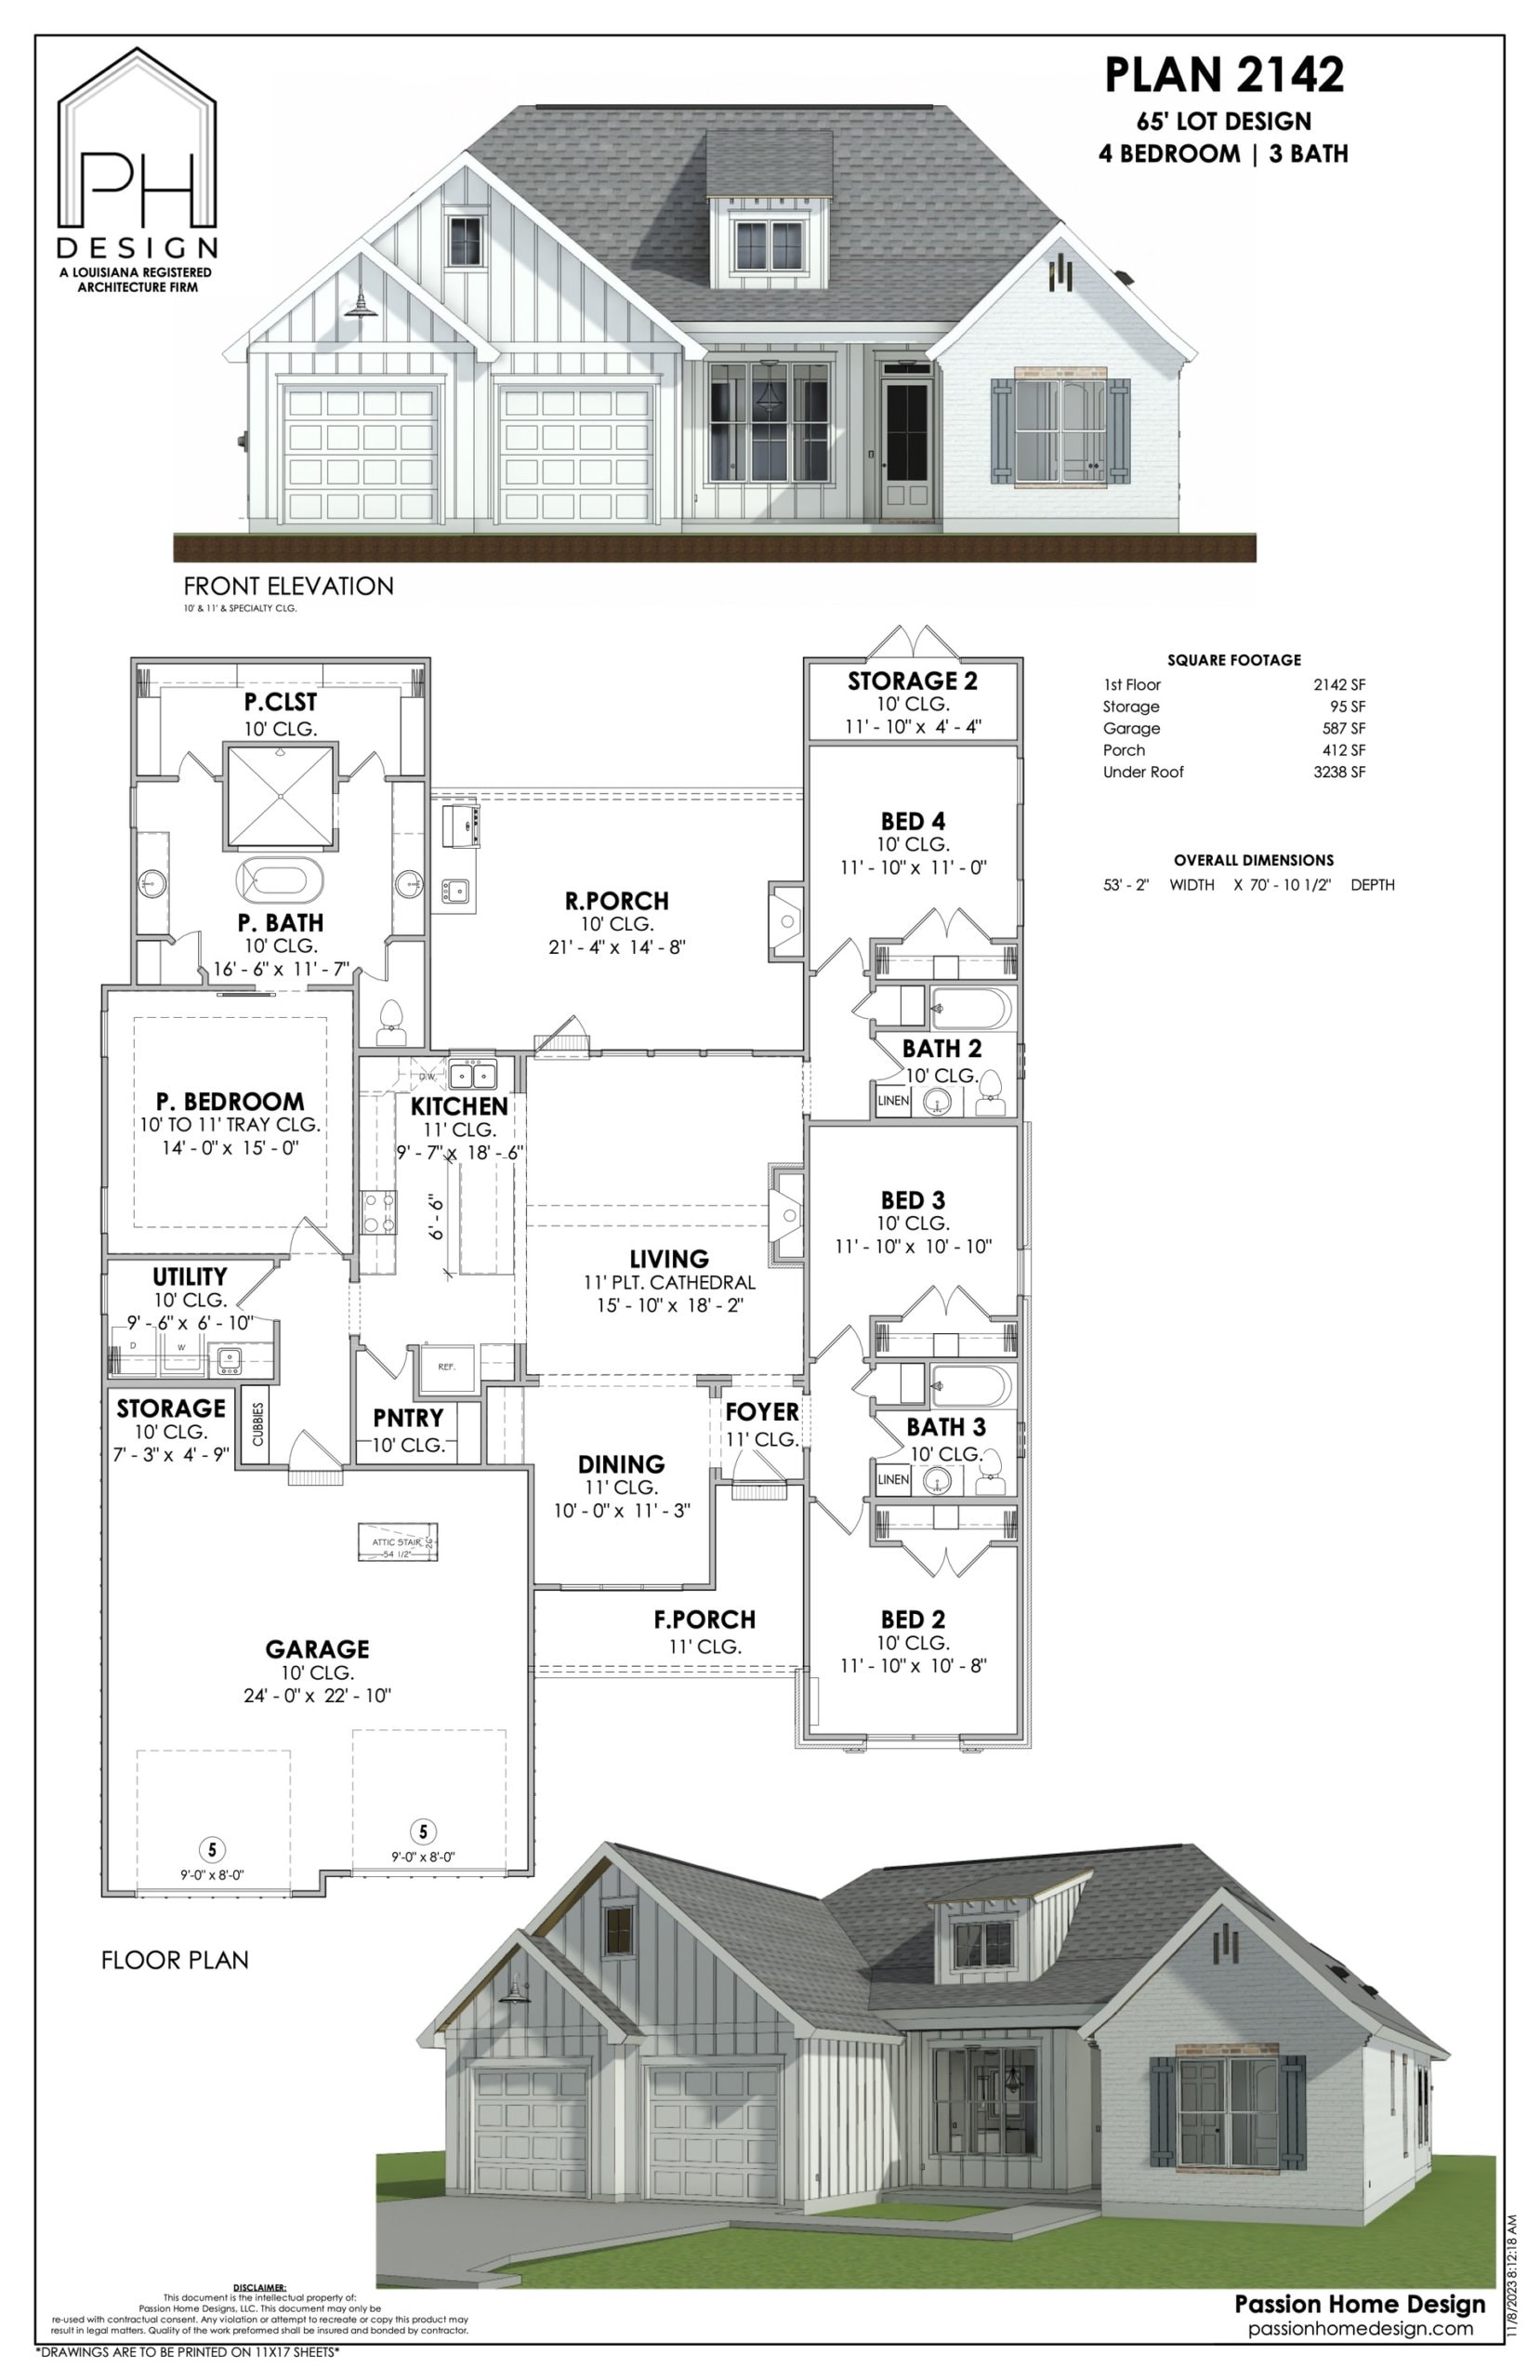 a house plan with a garage and two car garage.